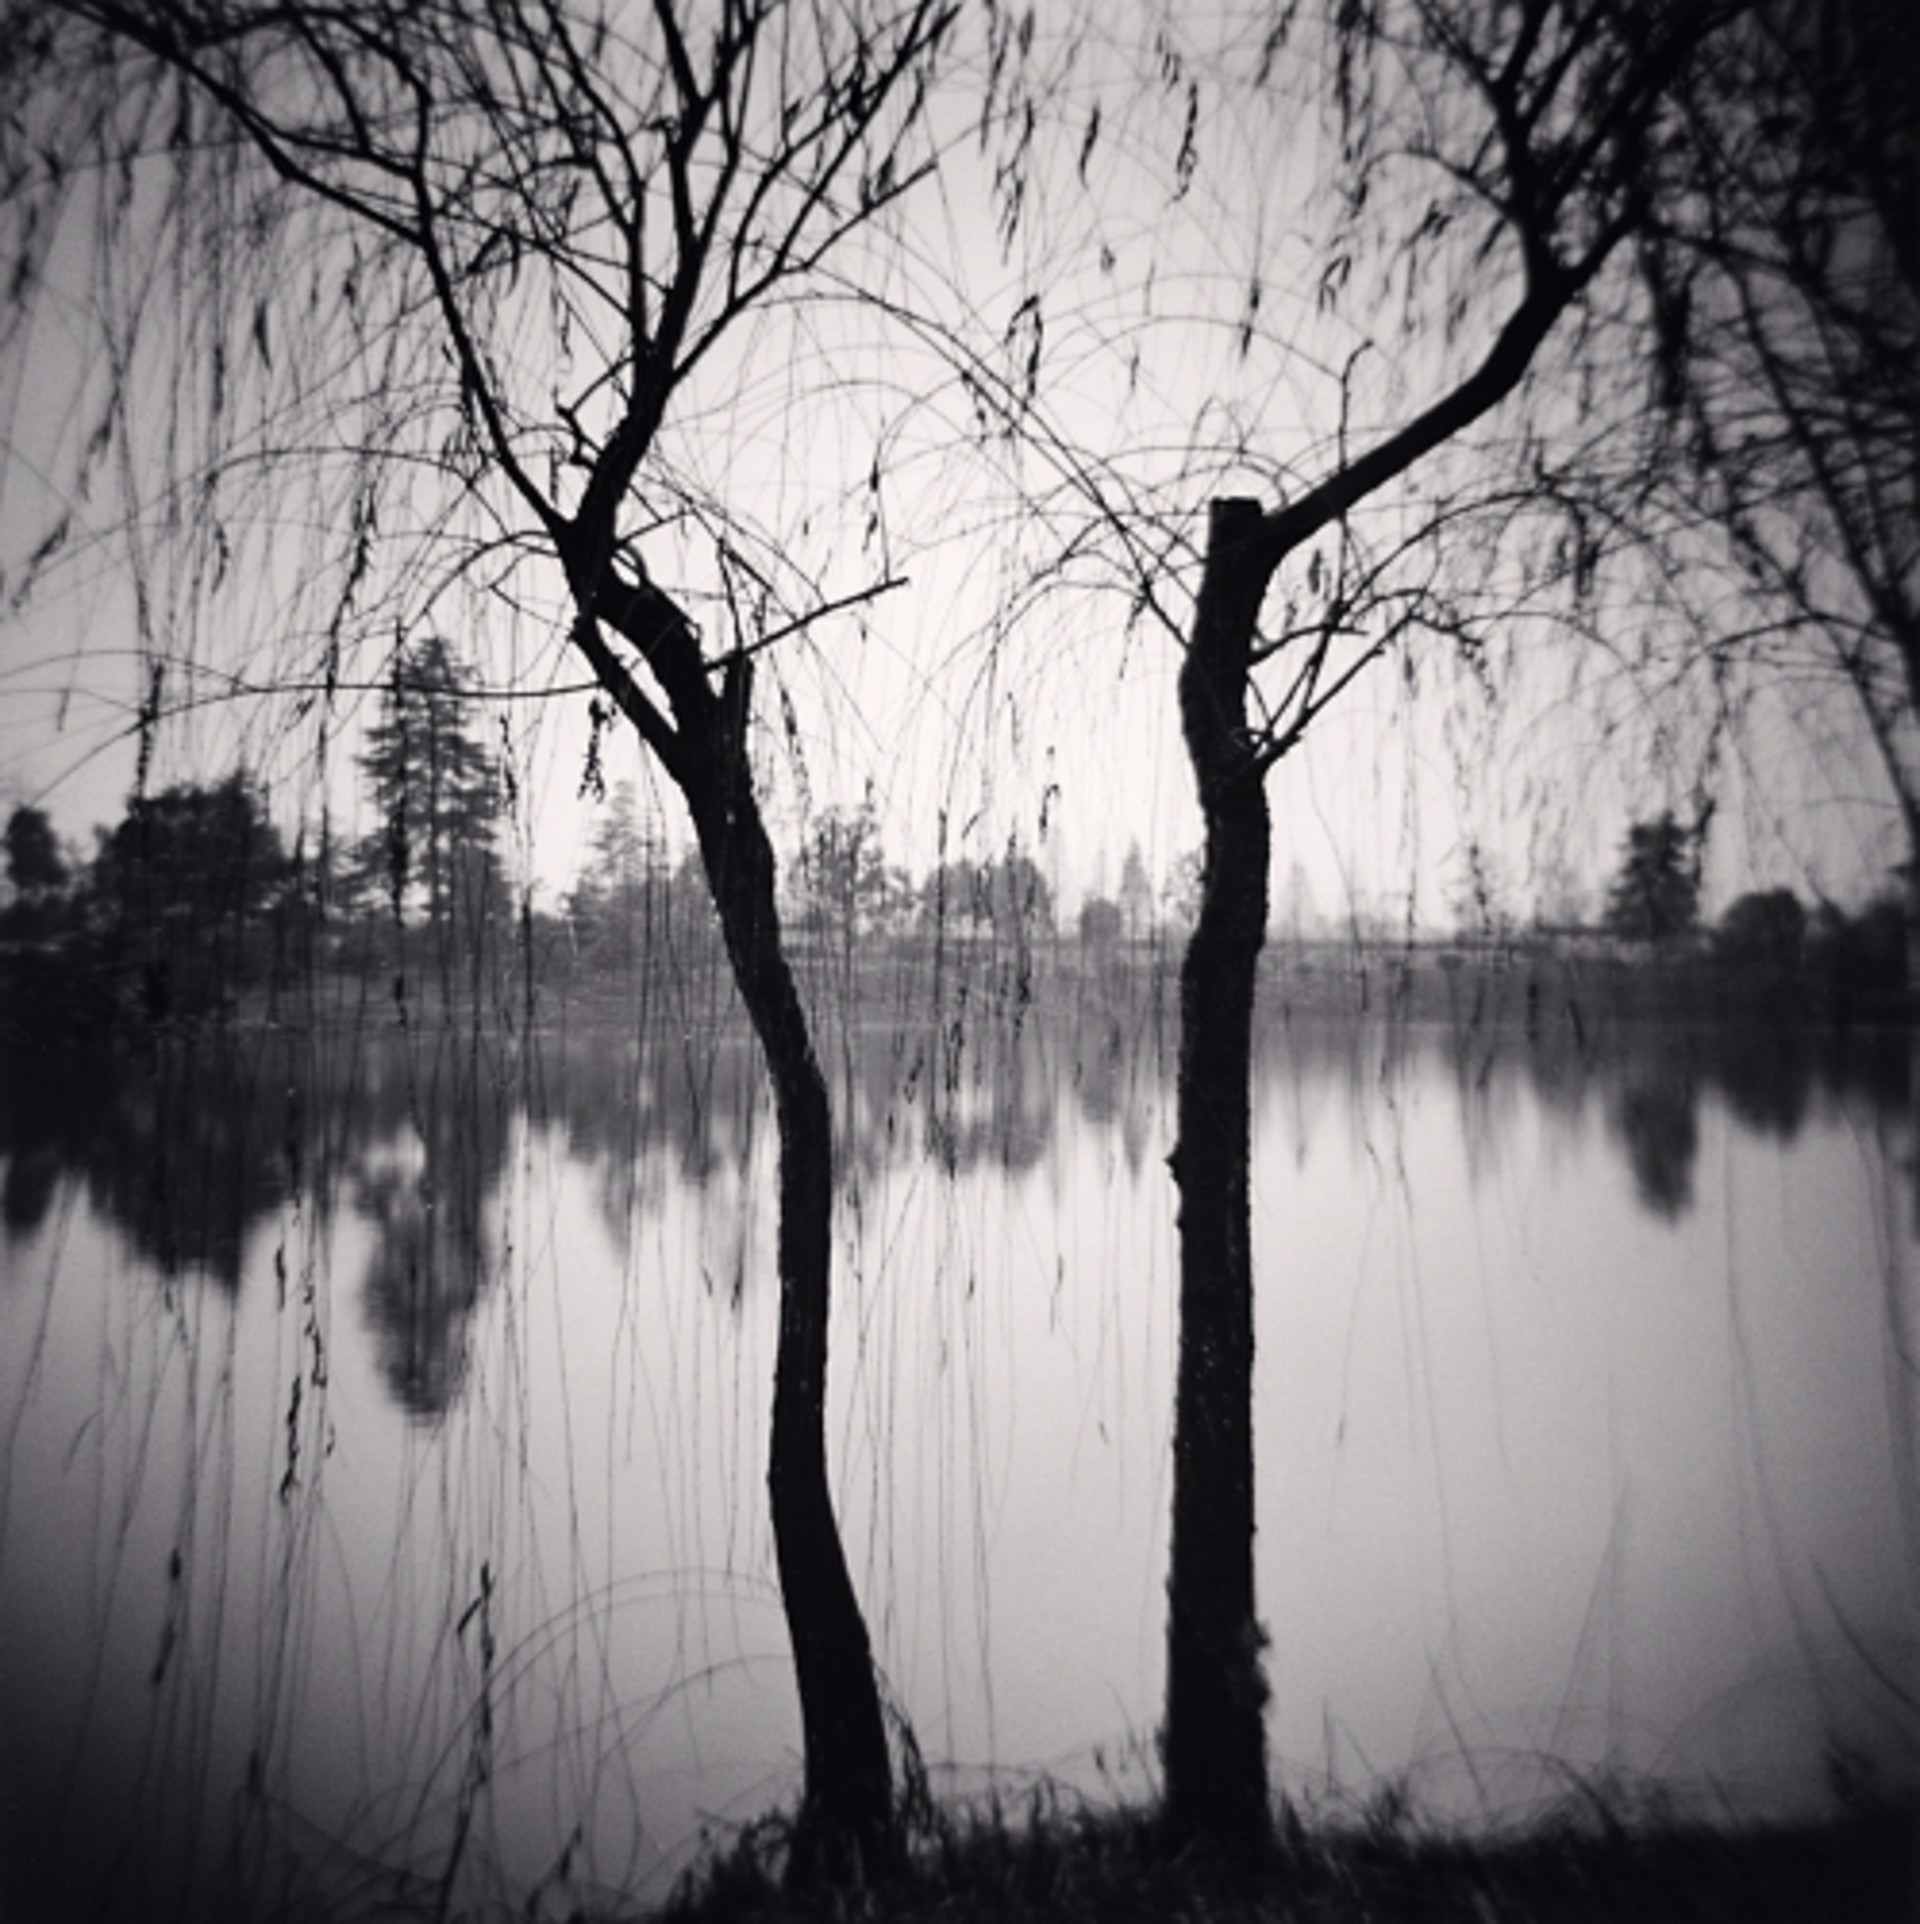 Afternoon Trees, Shexian, Anhui (edition of 45) by Michael Kenna